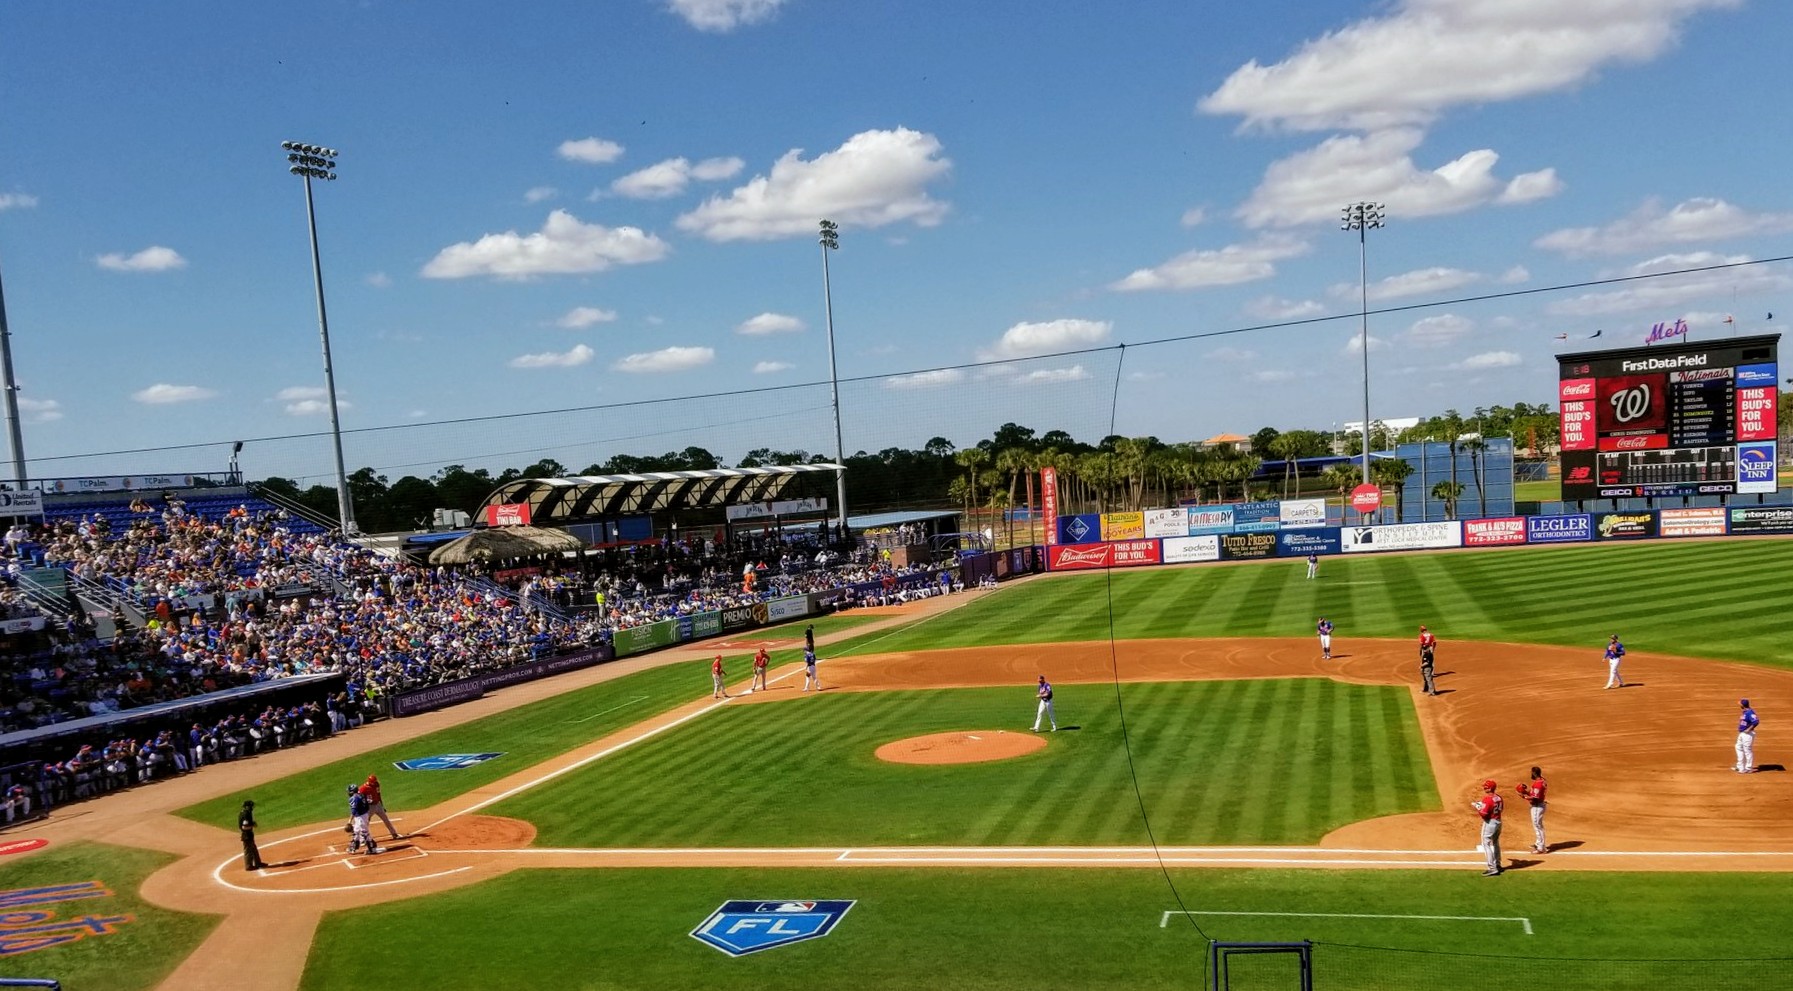 Game #22 is back in Port St. Lucie to face the Mets one more time before Opening Day!